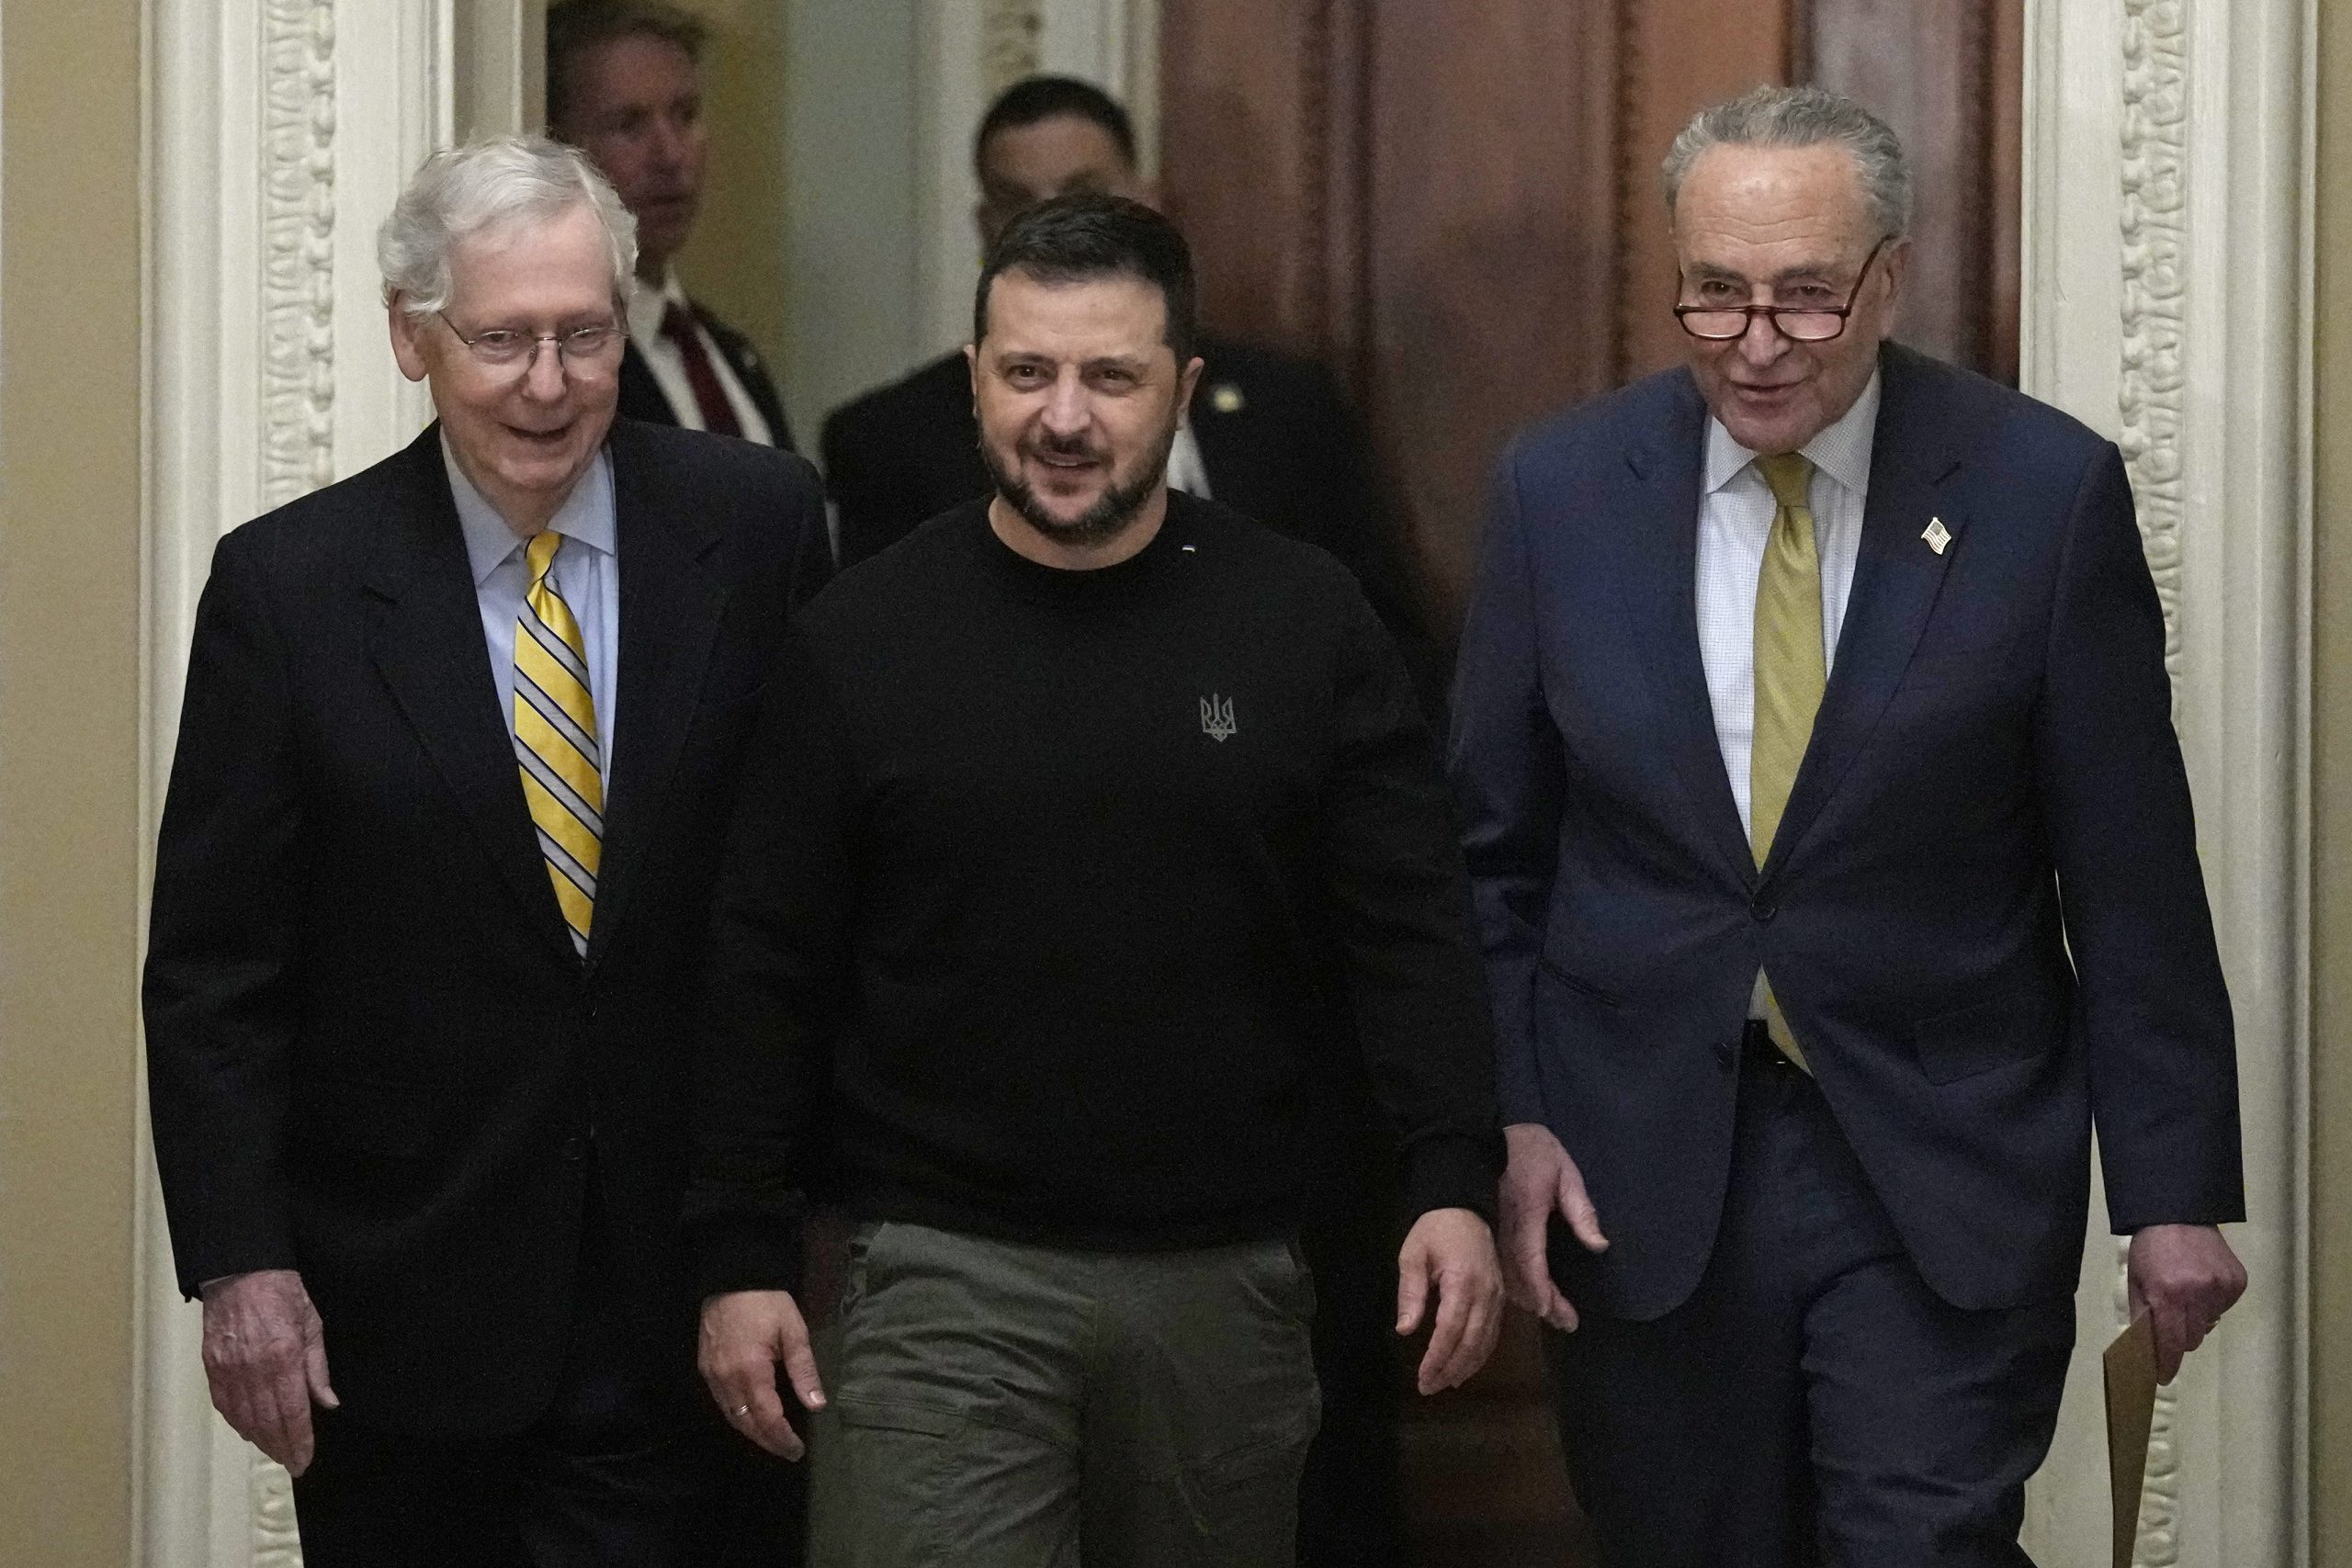 The US Senate will go on recess until funding for Ukraine is accepted